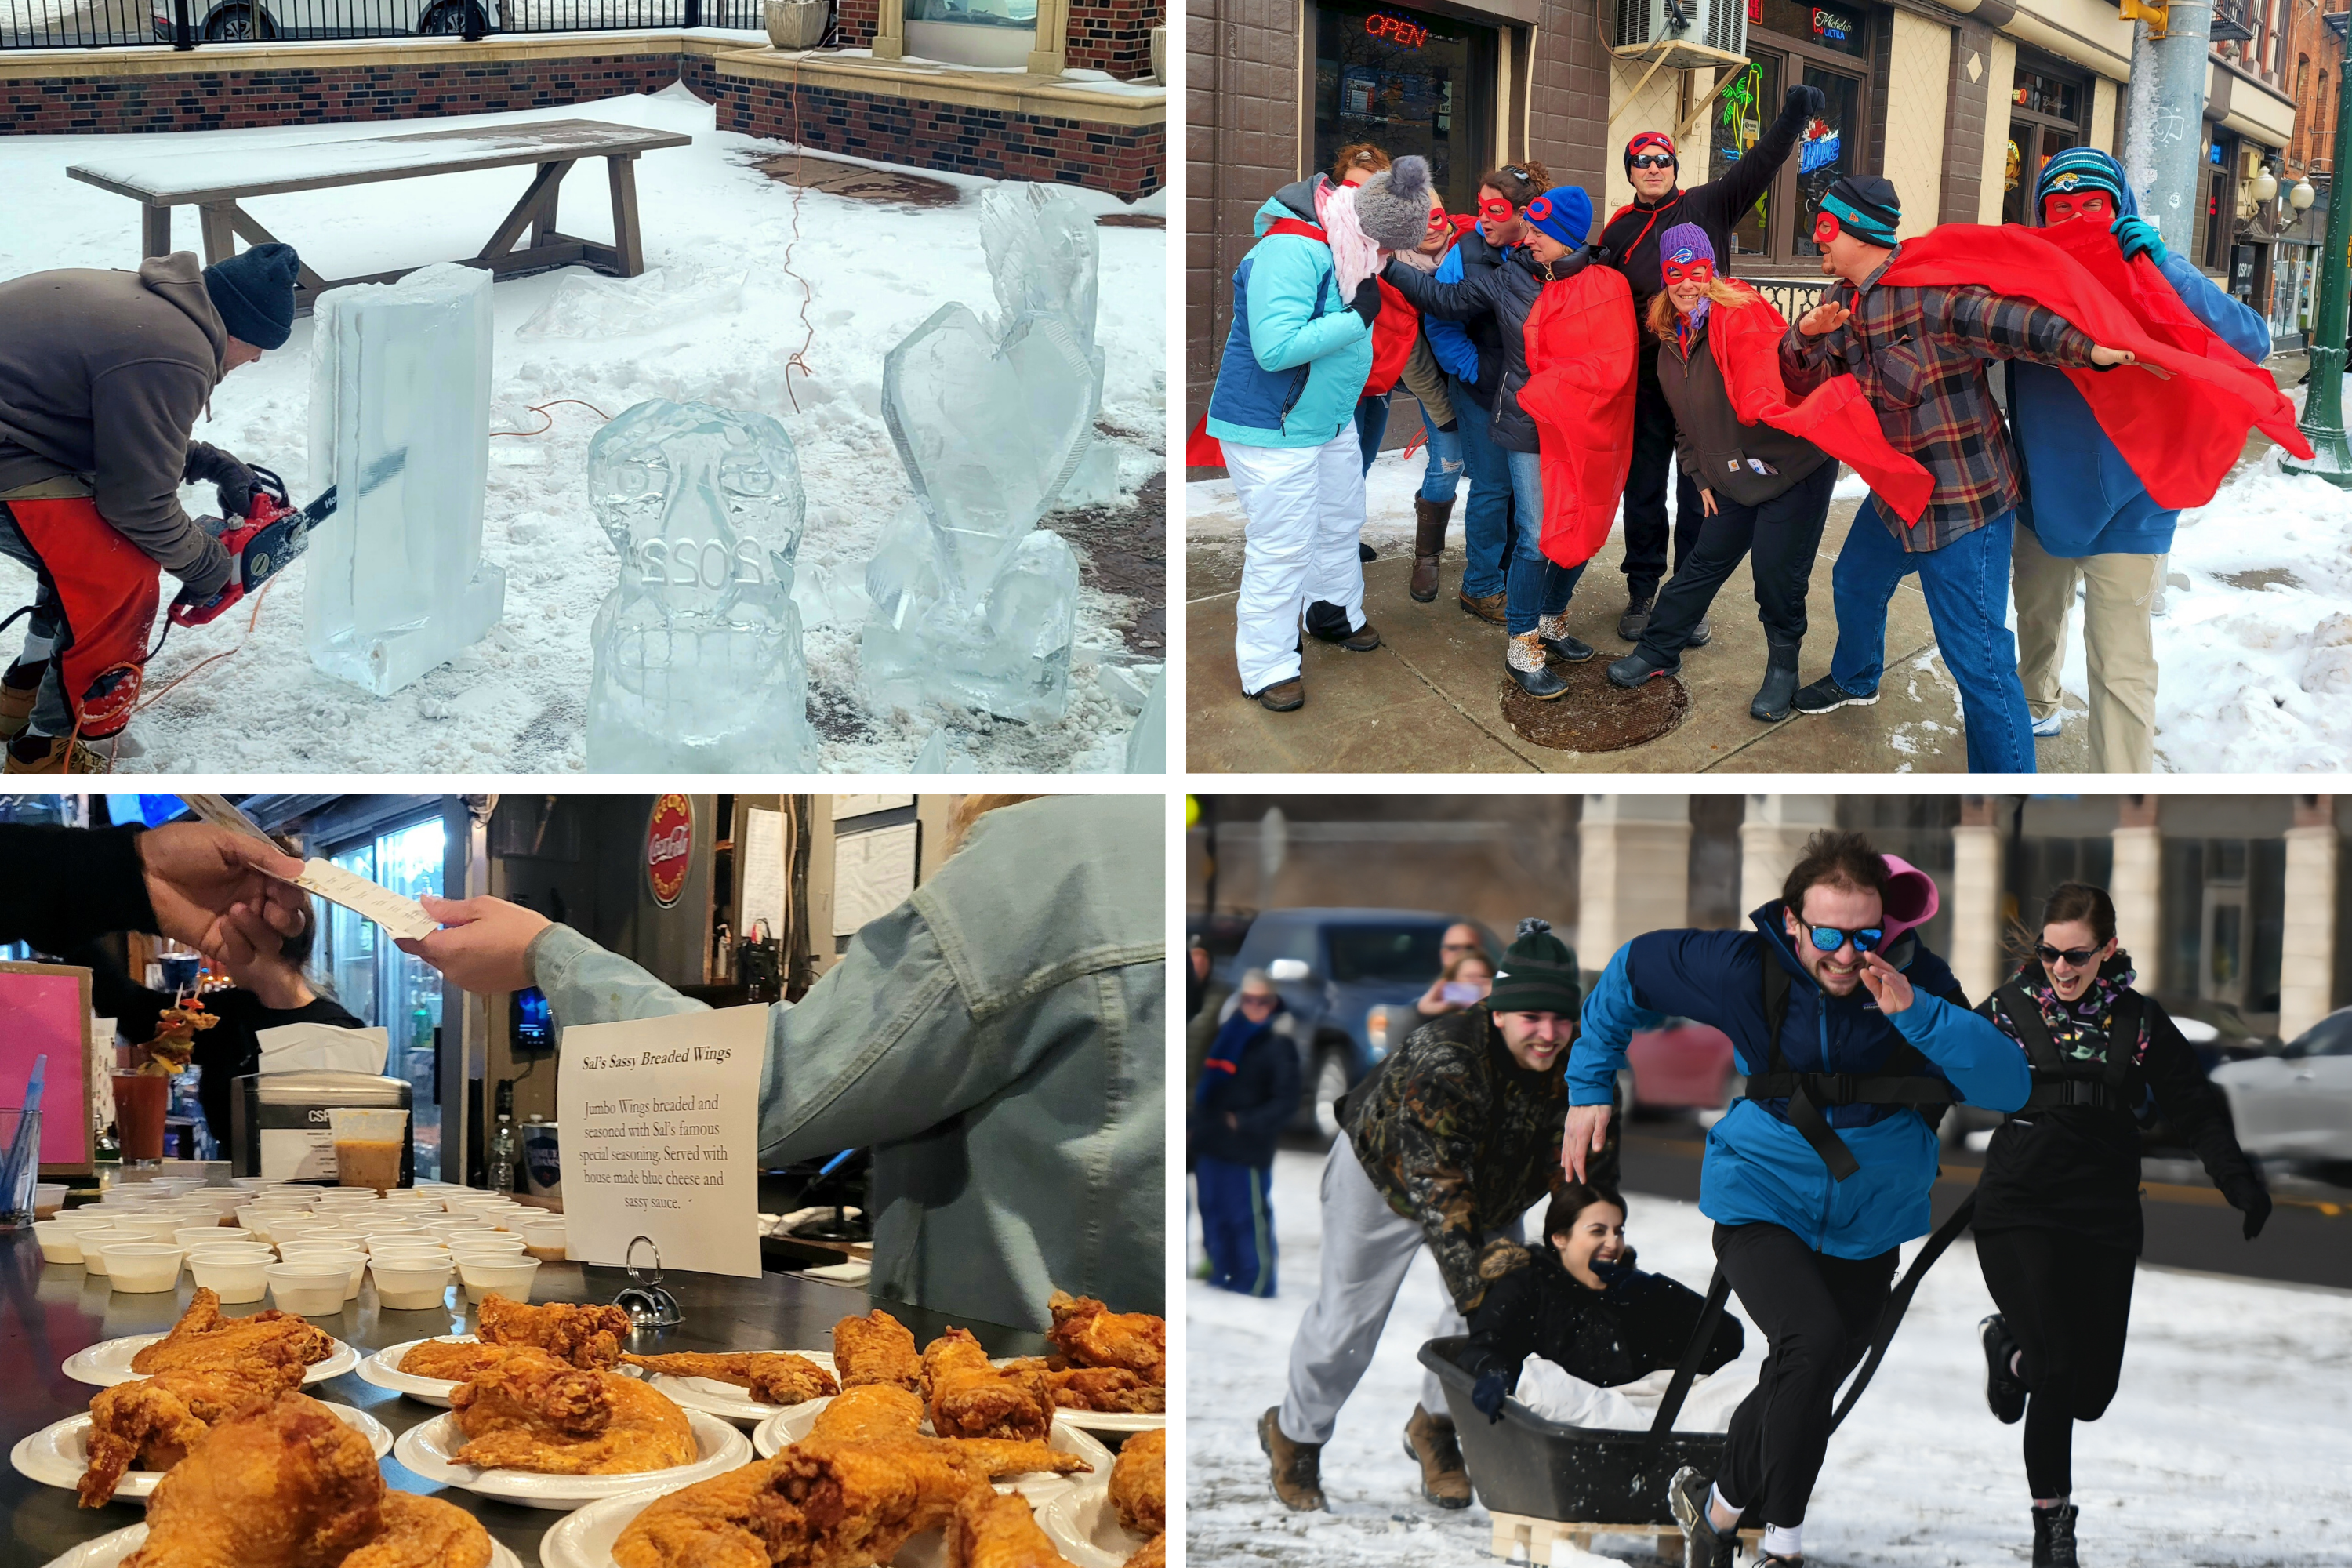 Pictured clockwise from top left: Ice sculpture artist and Onondaga Country Club professional chef Adam Vural carves a sculpture in a demonstration outside the Syracuse Downtown Marriott; a group of attendees participating in the Wing Walk, self-styled "Wing Avengers," takes to the streets; a team of human dogsled racers compete in a race at the Inner Harbor field; Wing Walk attendees at Clinton Street Pub sample the vendor's wings and cast their votes.